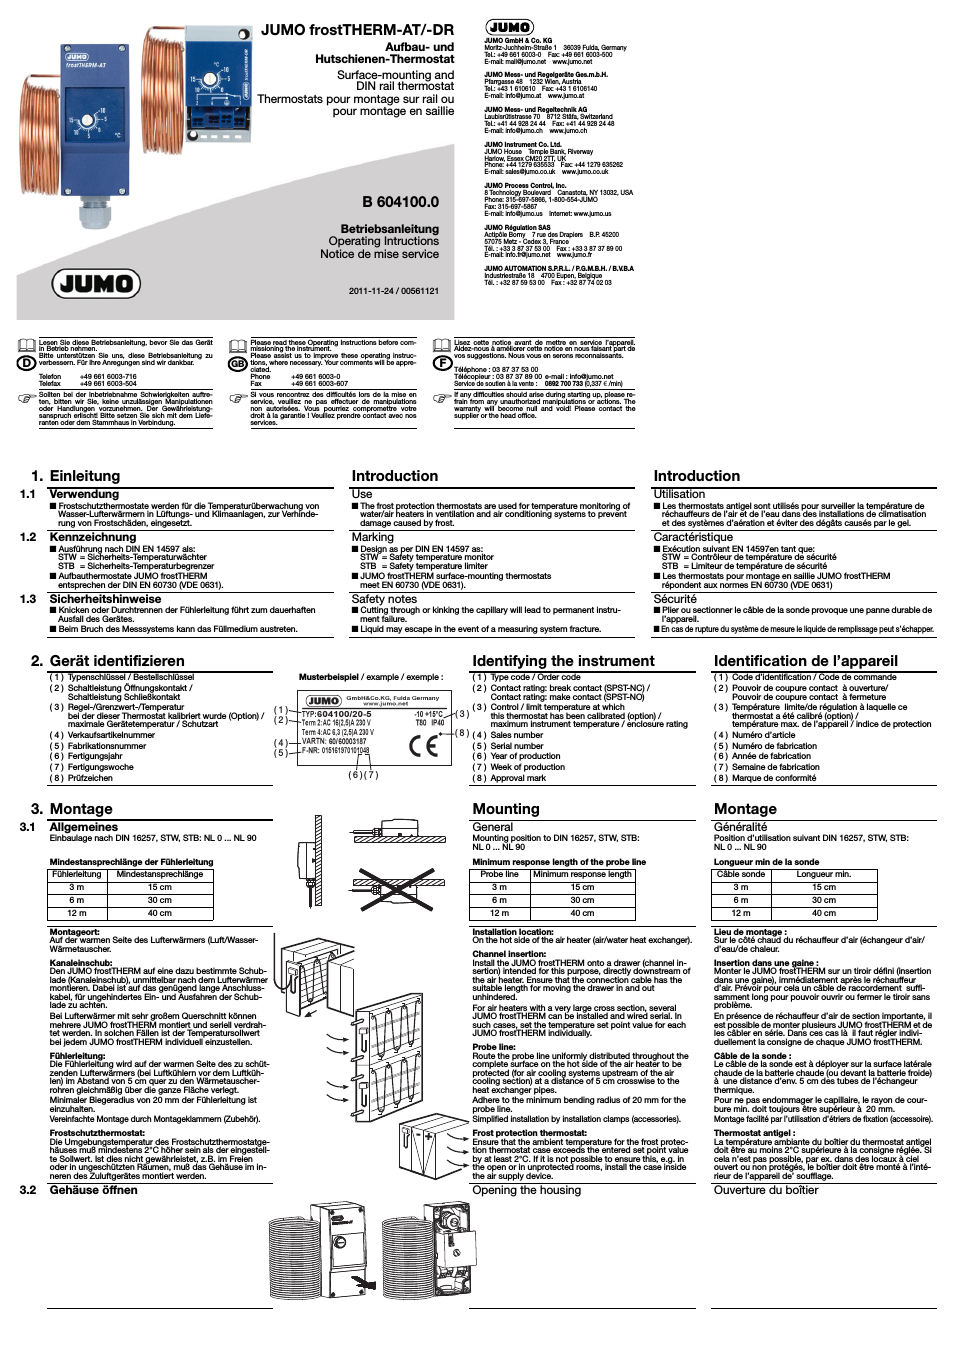 604100 frostTHERM-AT/-DR Operating Manual